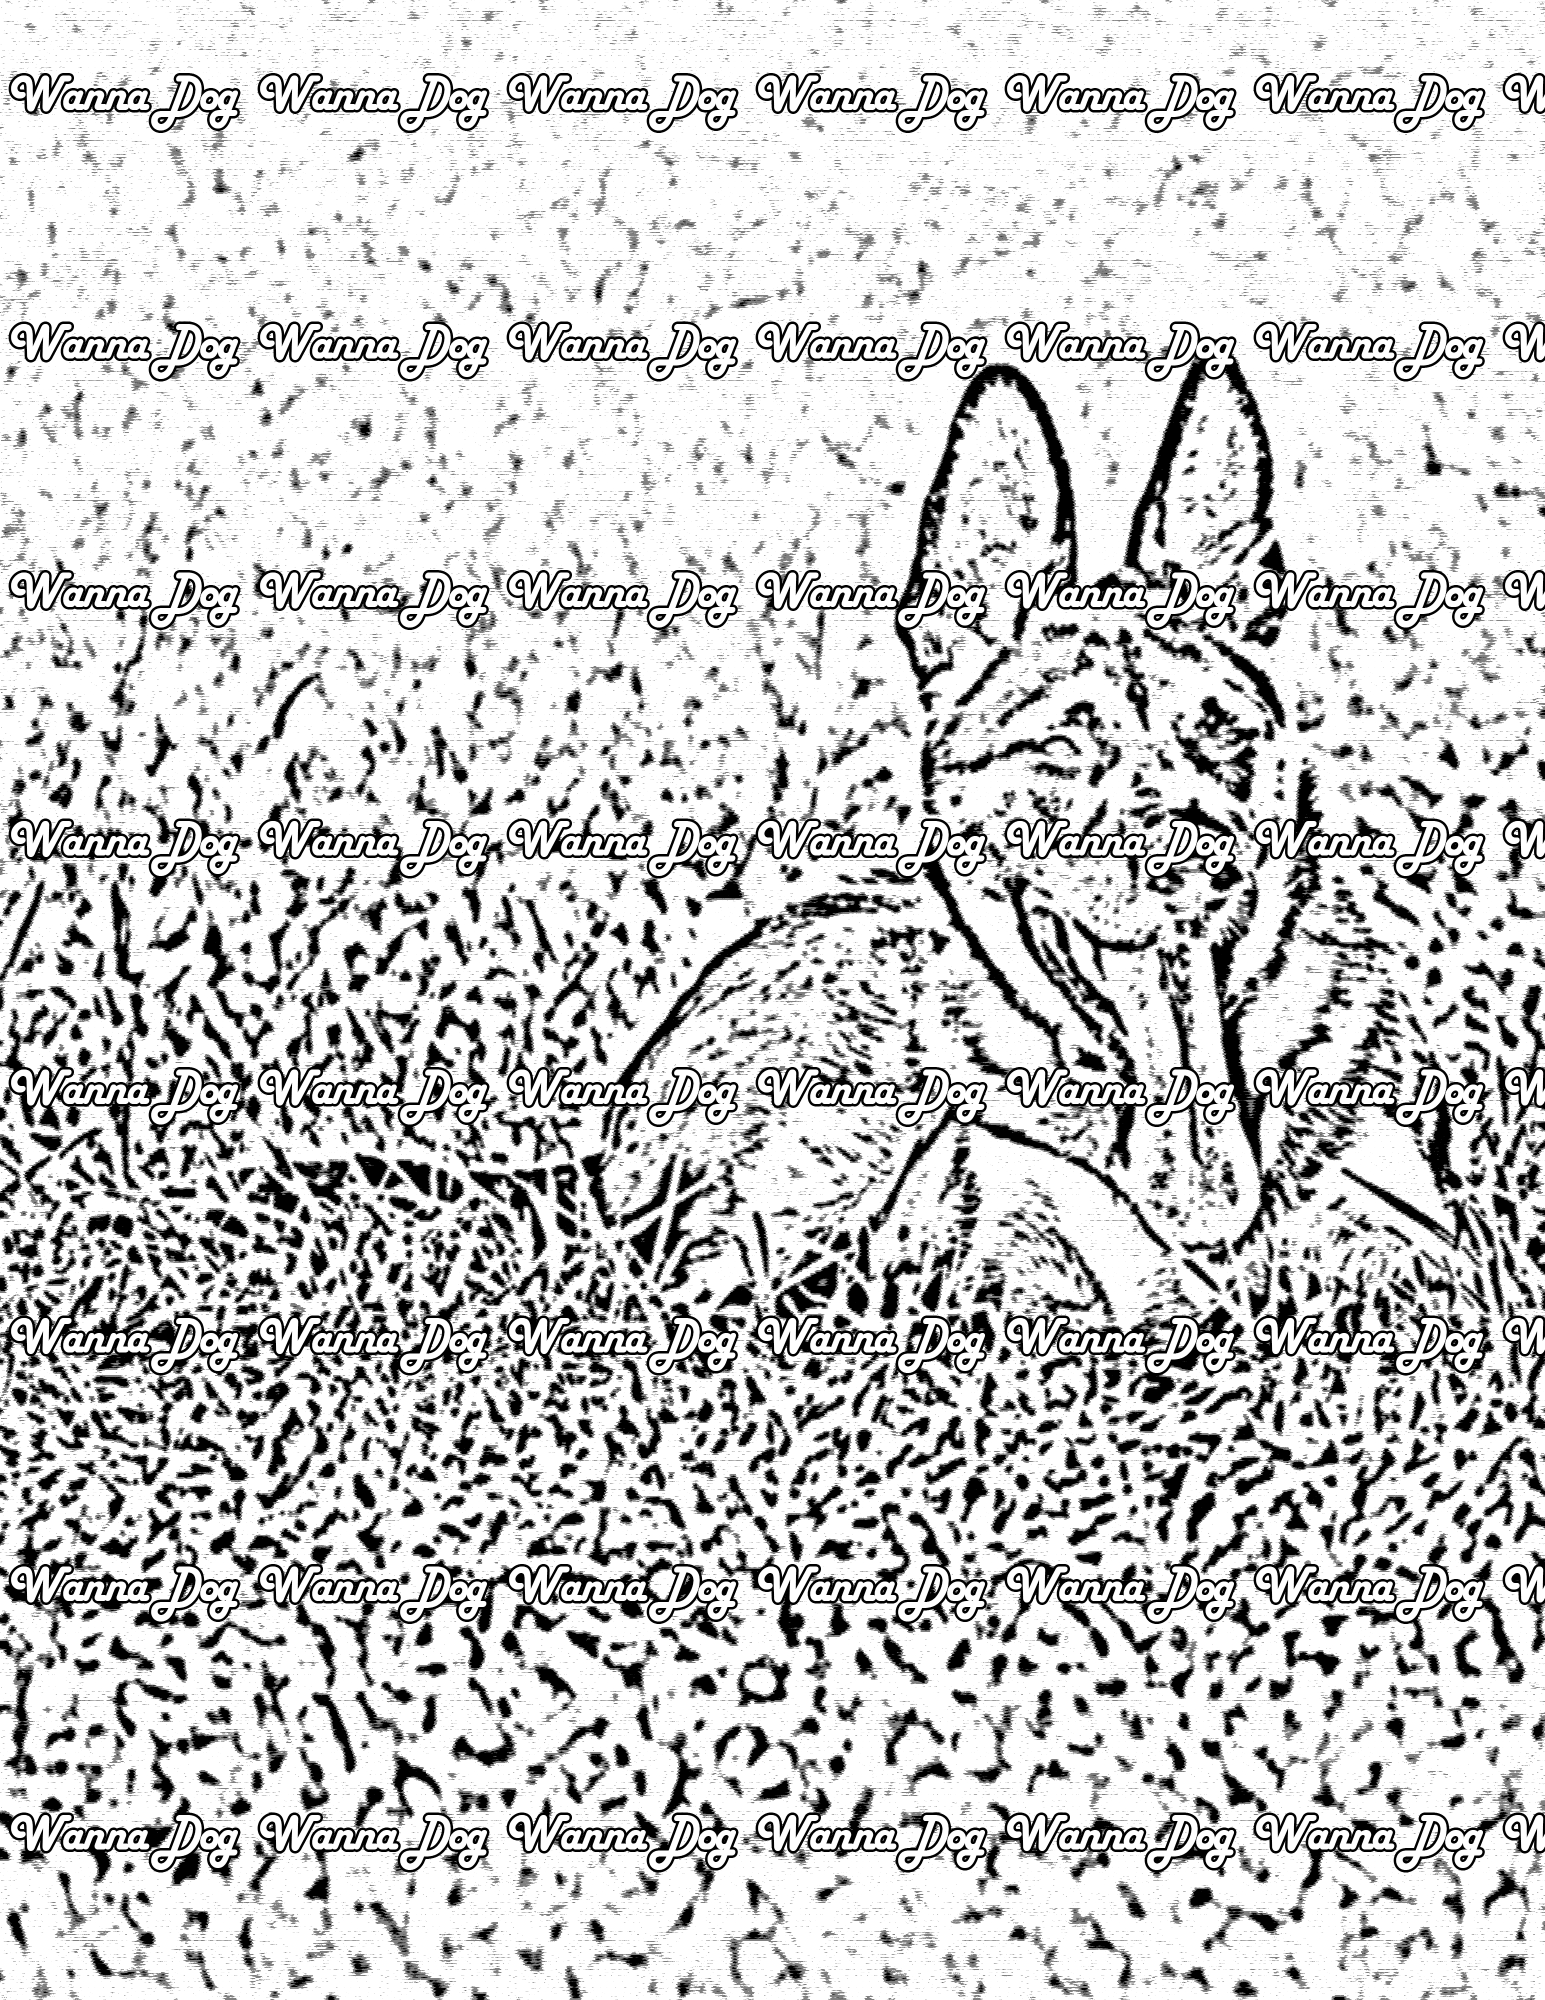 German Shepherd Coloring Page of a German Shepherd in grass with their tongue out